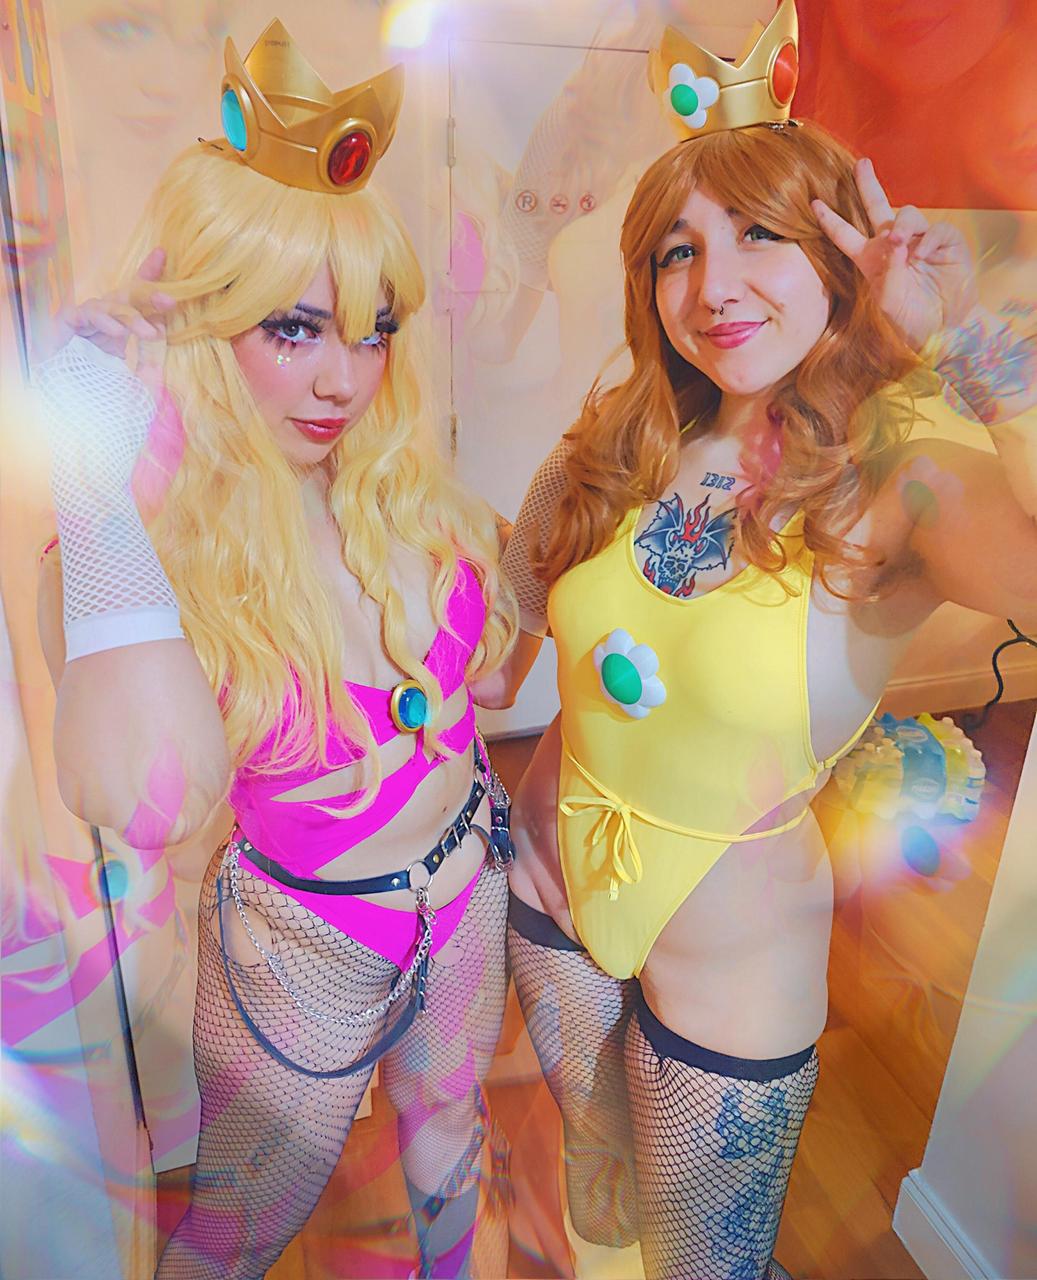 My Friend As Peach And Myself As Daisy For A Con After Party Last Weekend 